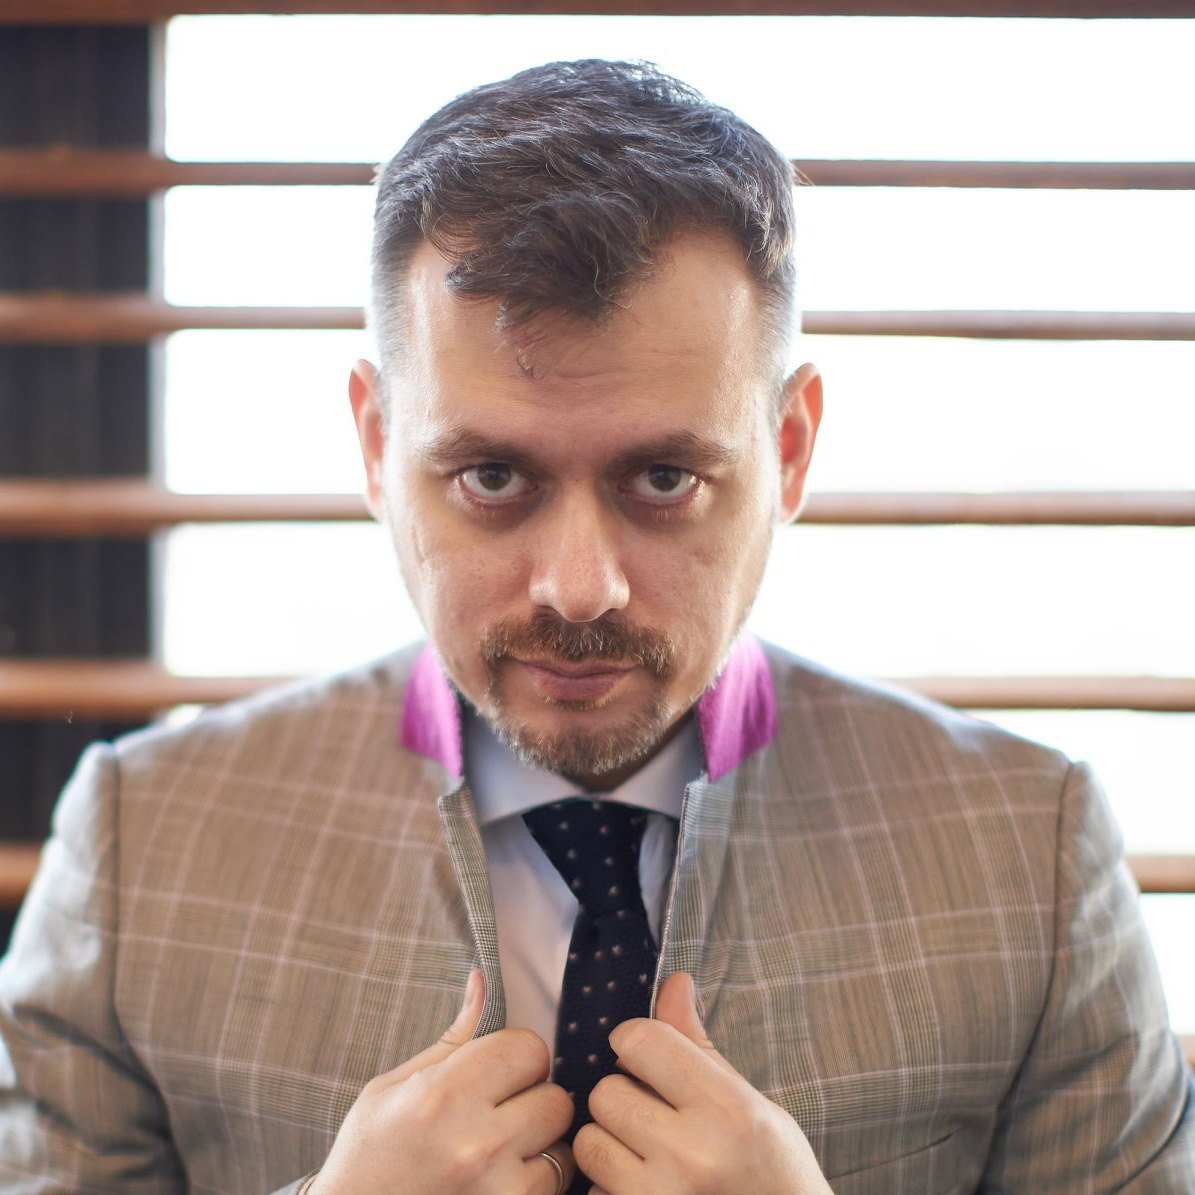 Sergey mustafaev the partner consultant holding his suit while staring at the camera